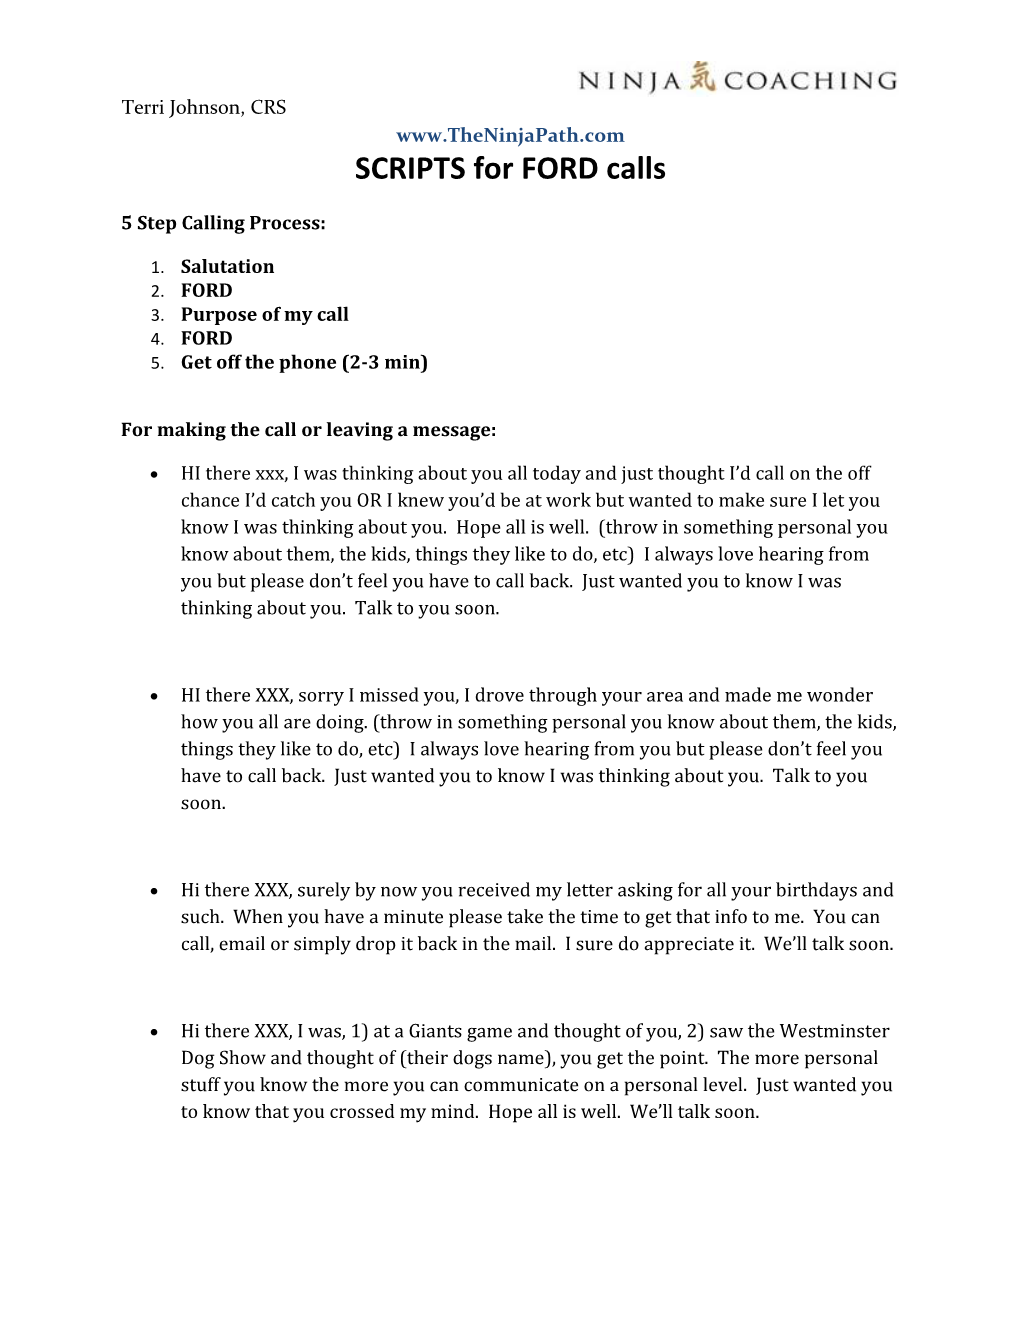 SCRIPTS for FORD Calls